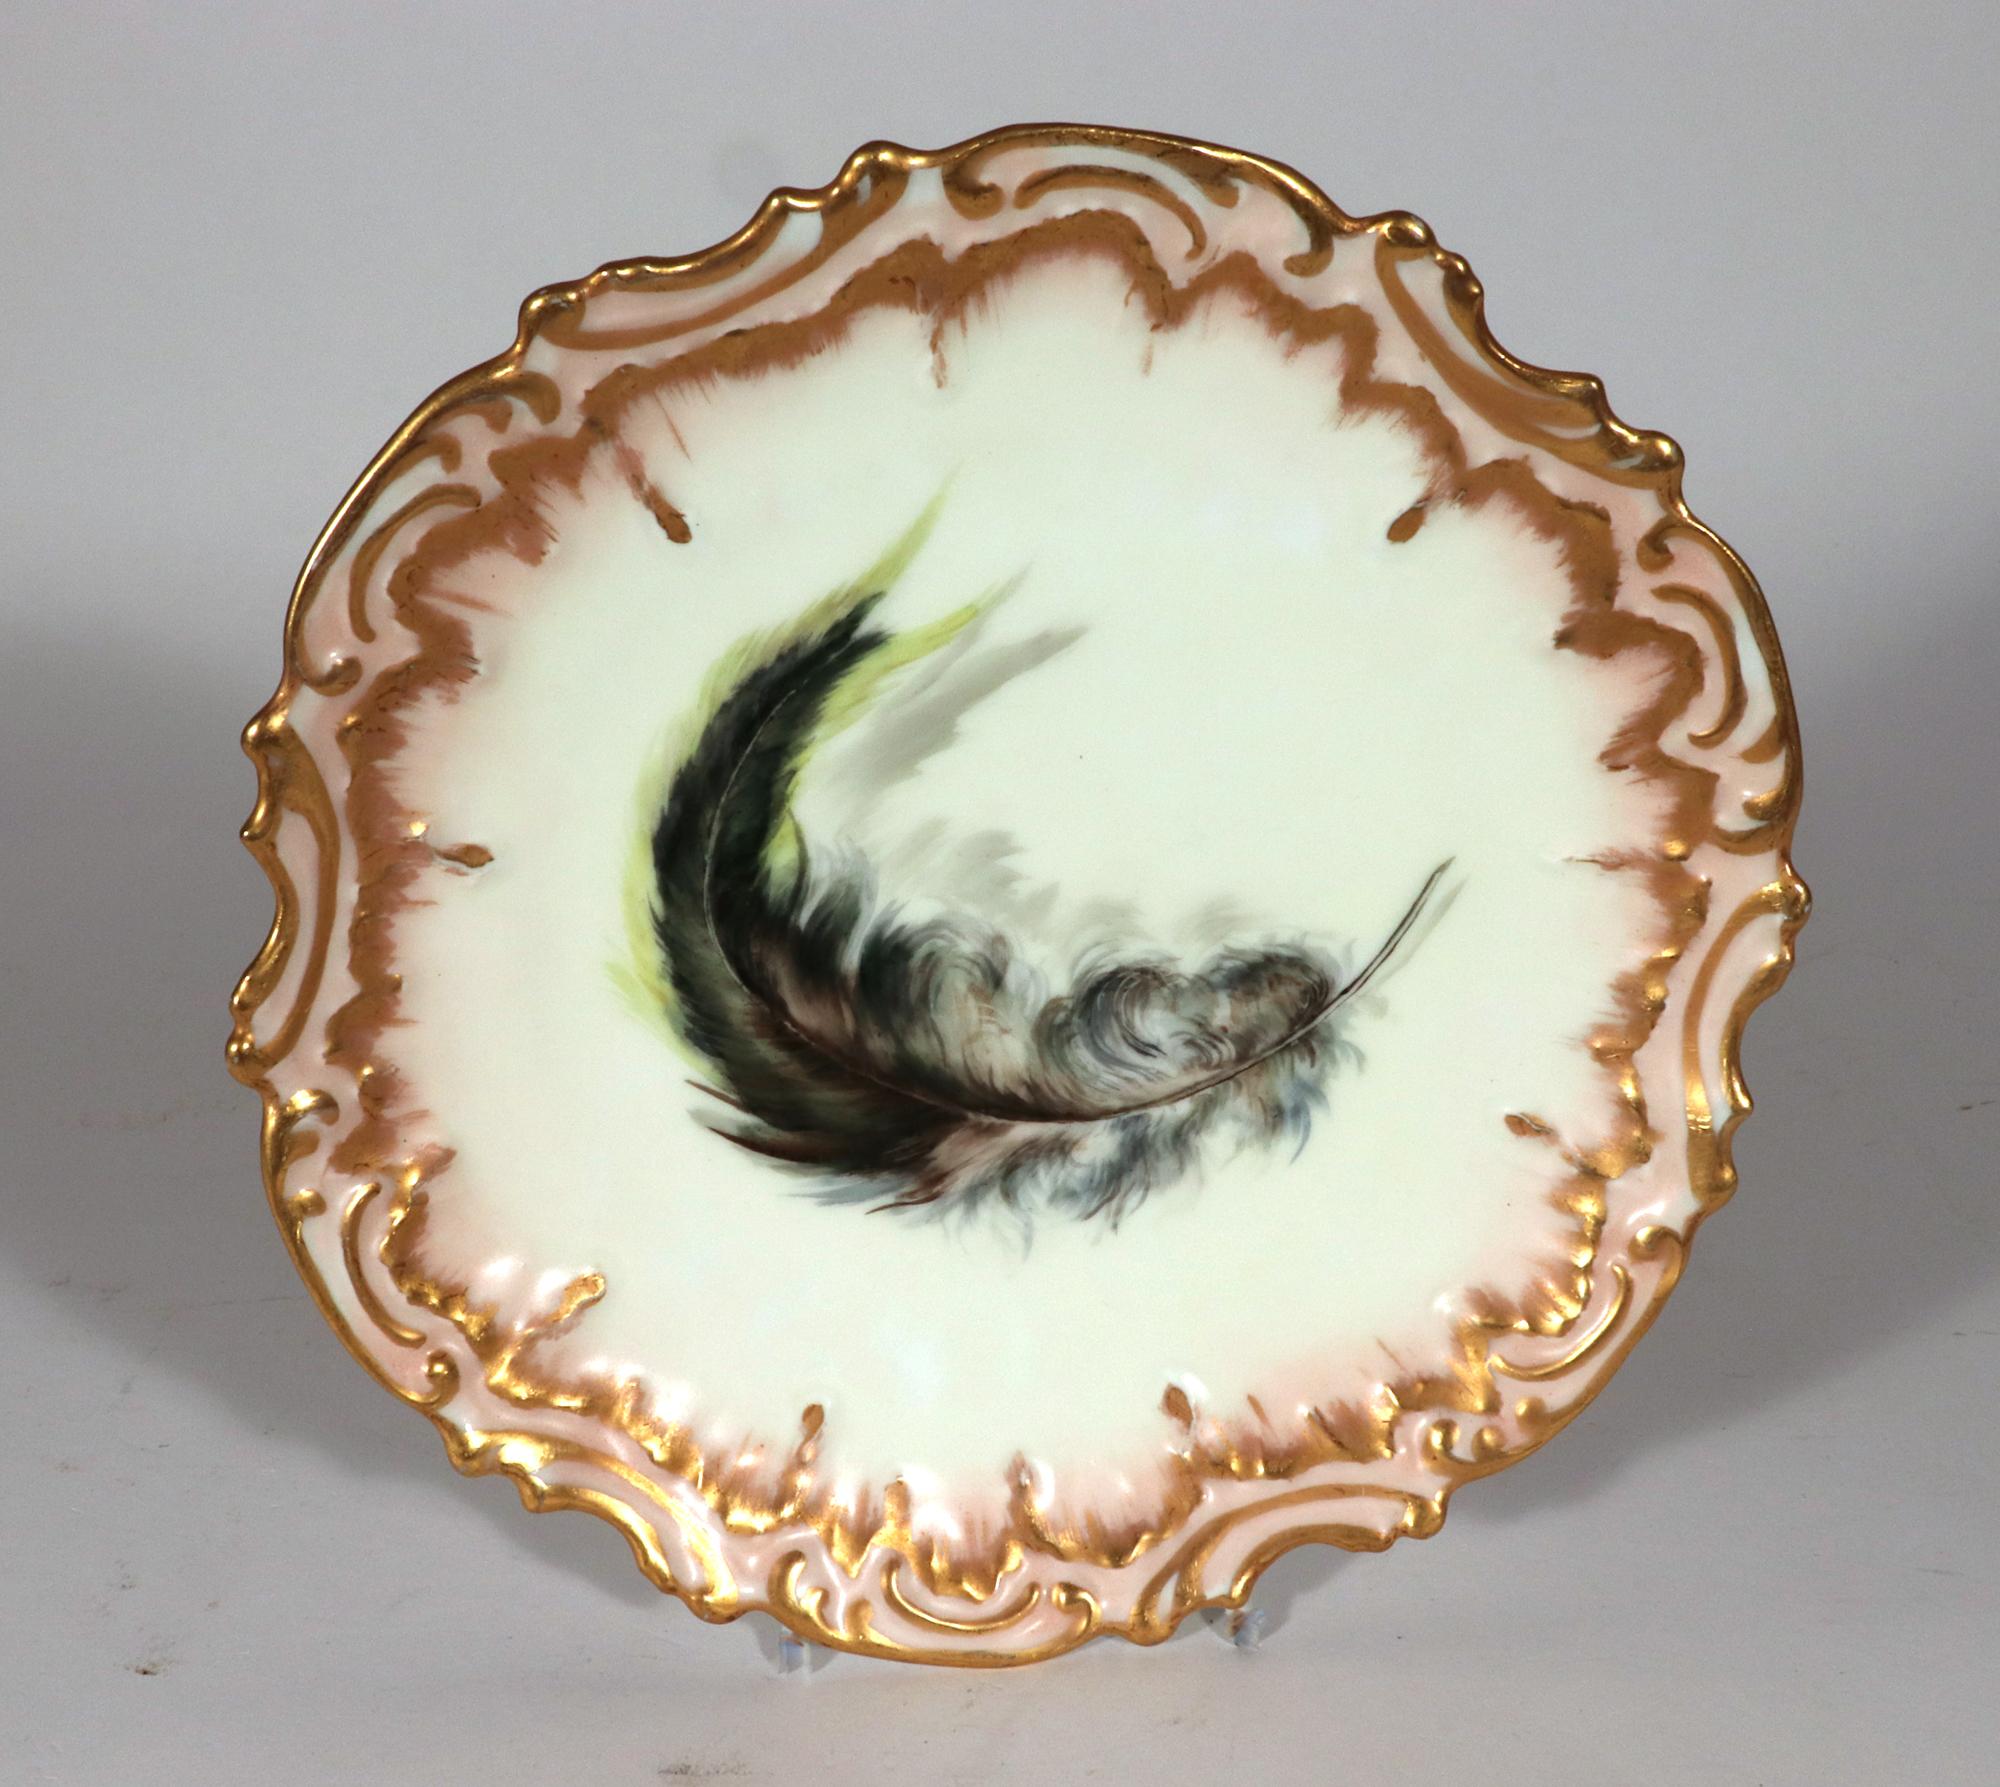 Limoges Porcelain Dessert Plates decorated with Feathers, Set of Ten 3